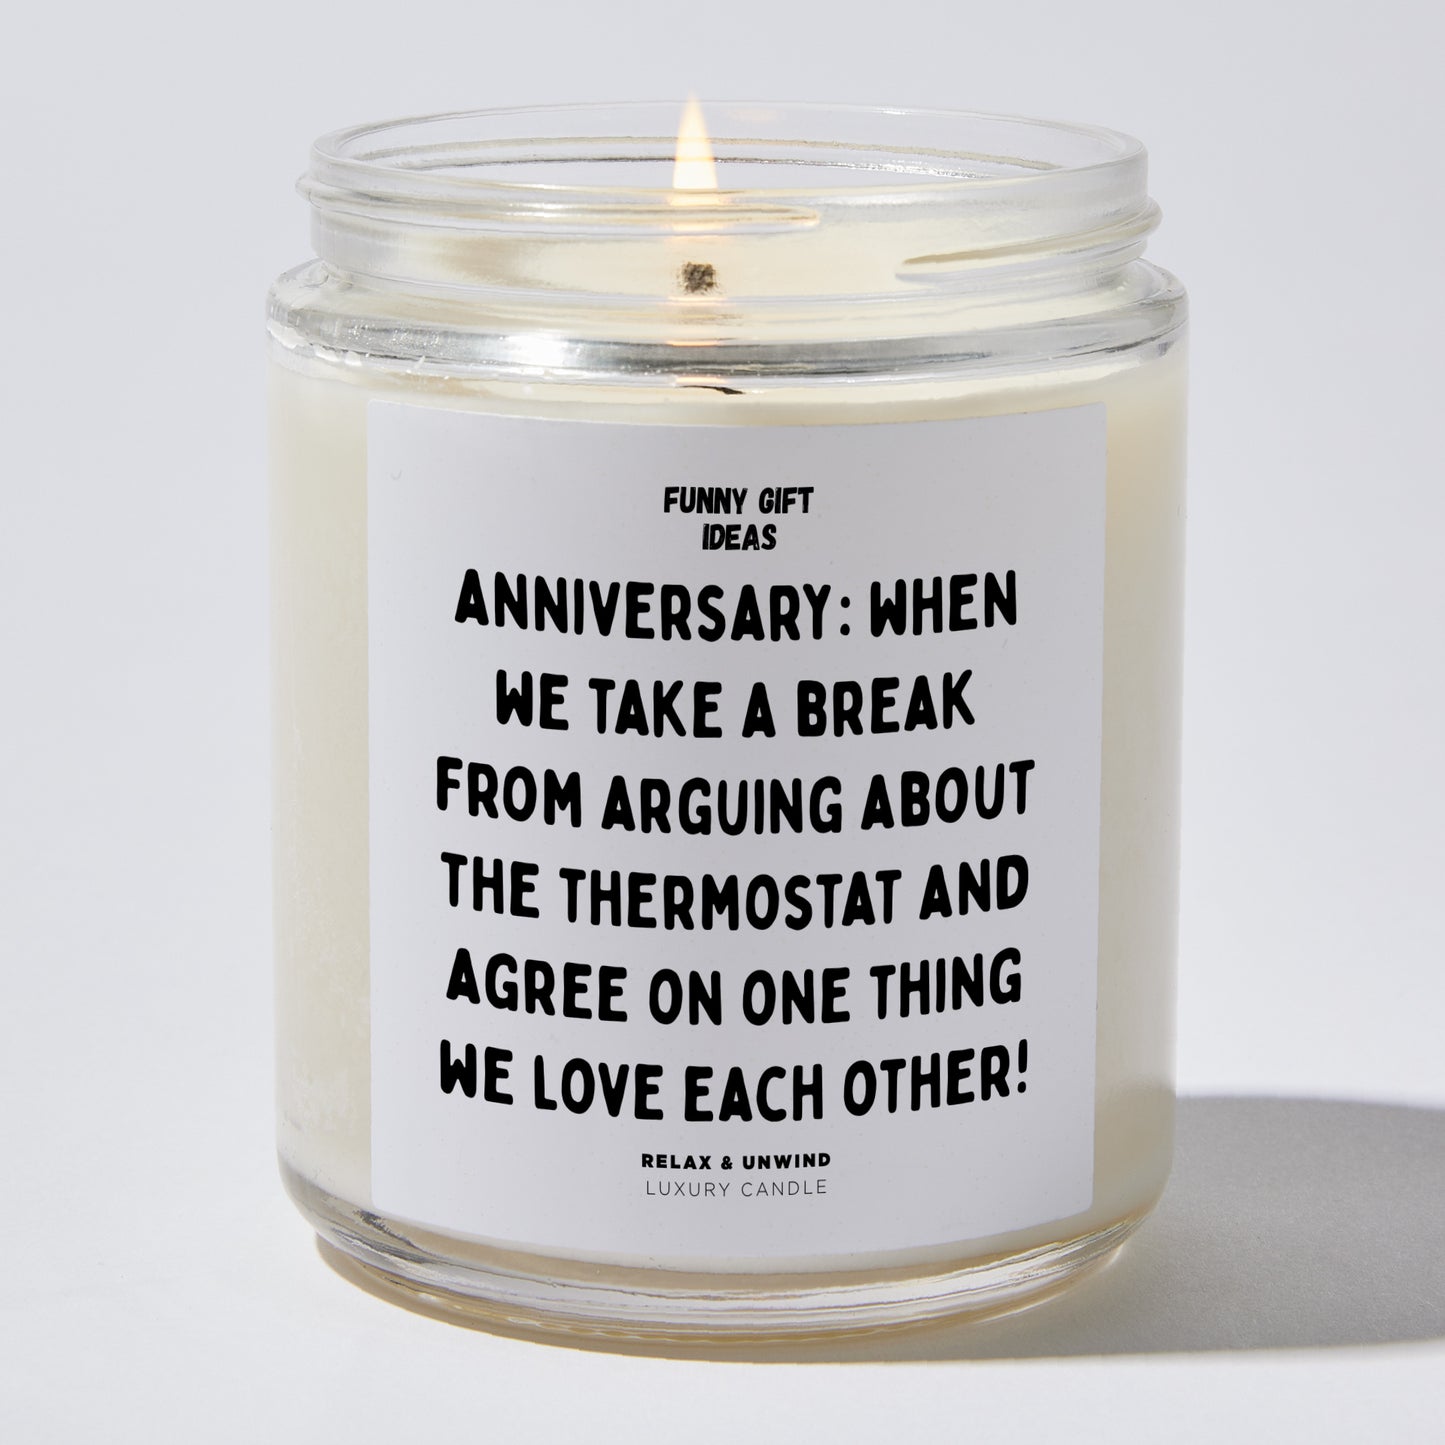 Anniversary Present - Anniversary: When We Take a Break From Arguing About the Thermostat and Agree on One Thing – We Love Each Other! - Candle